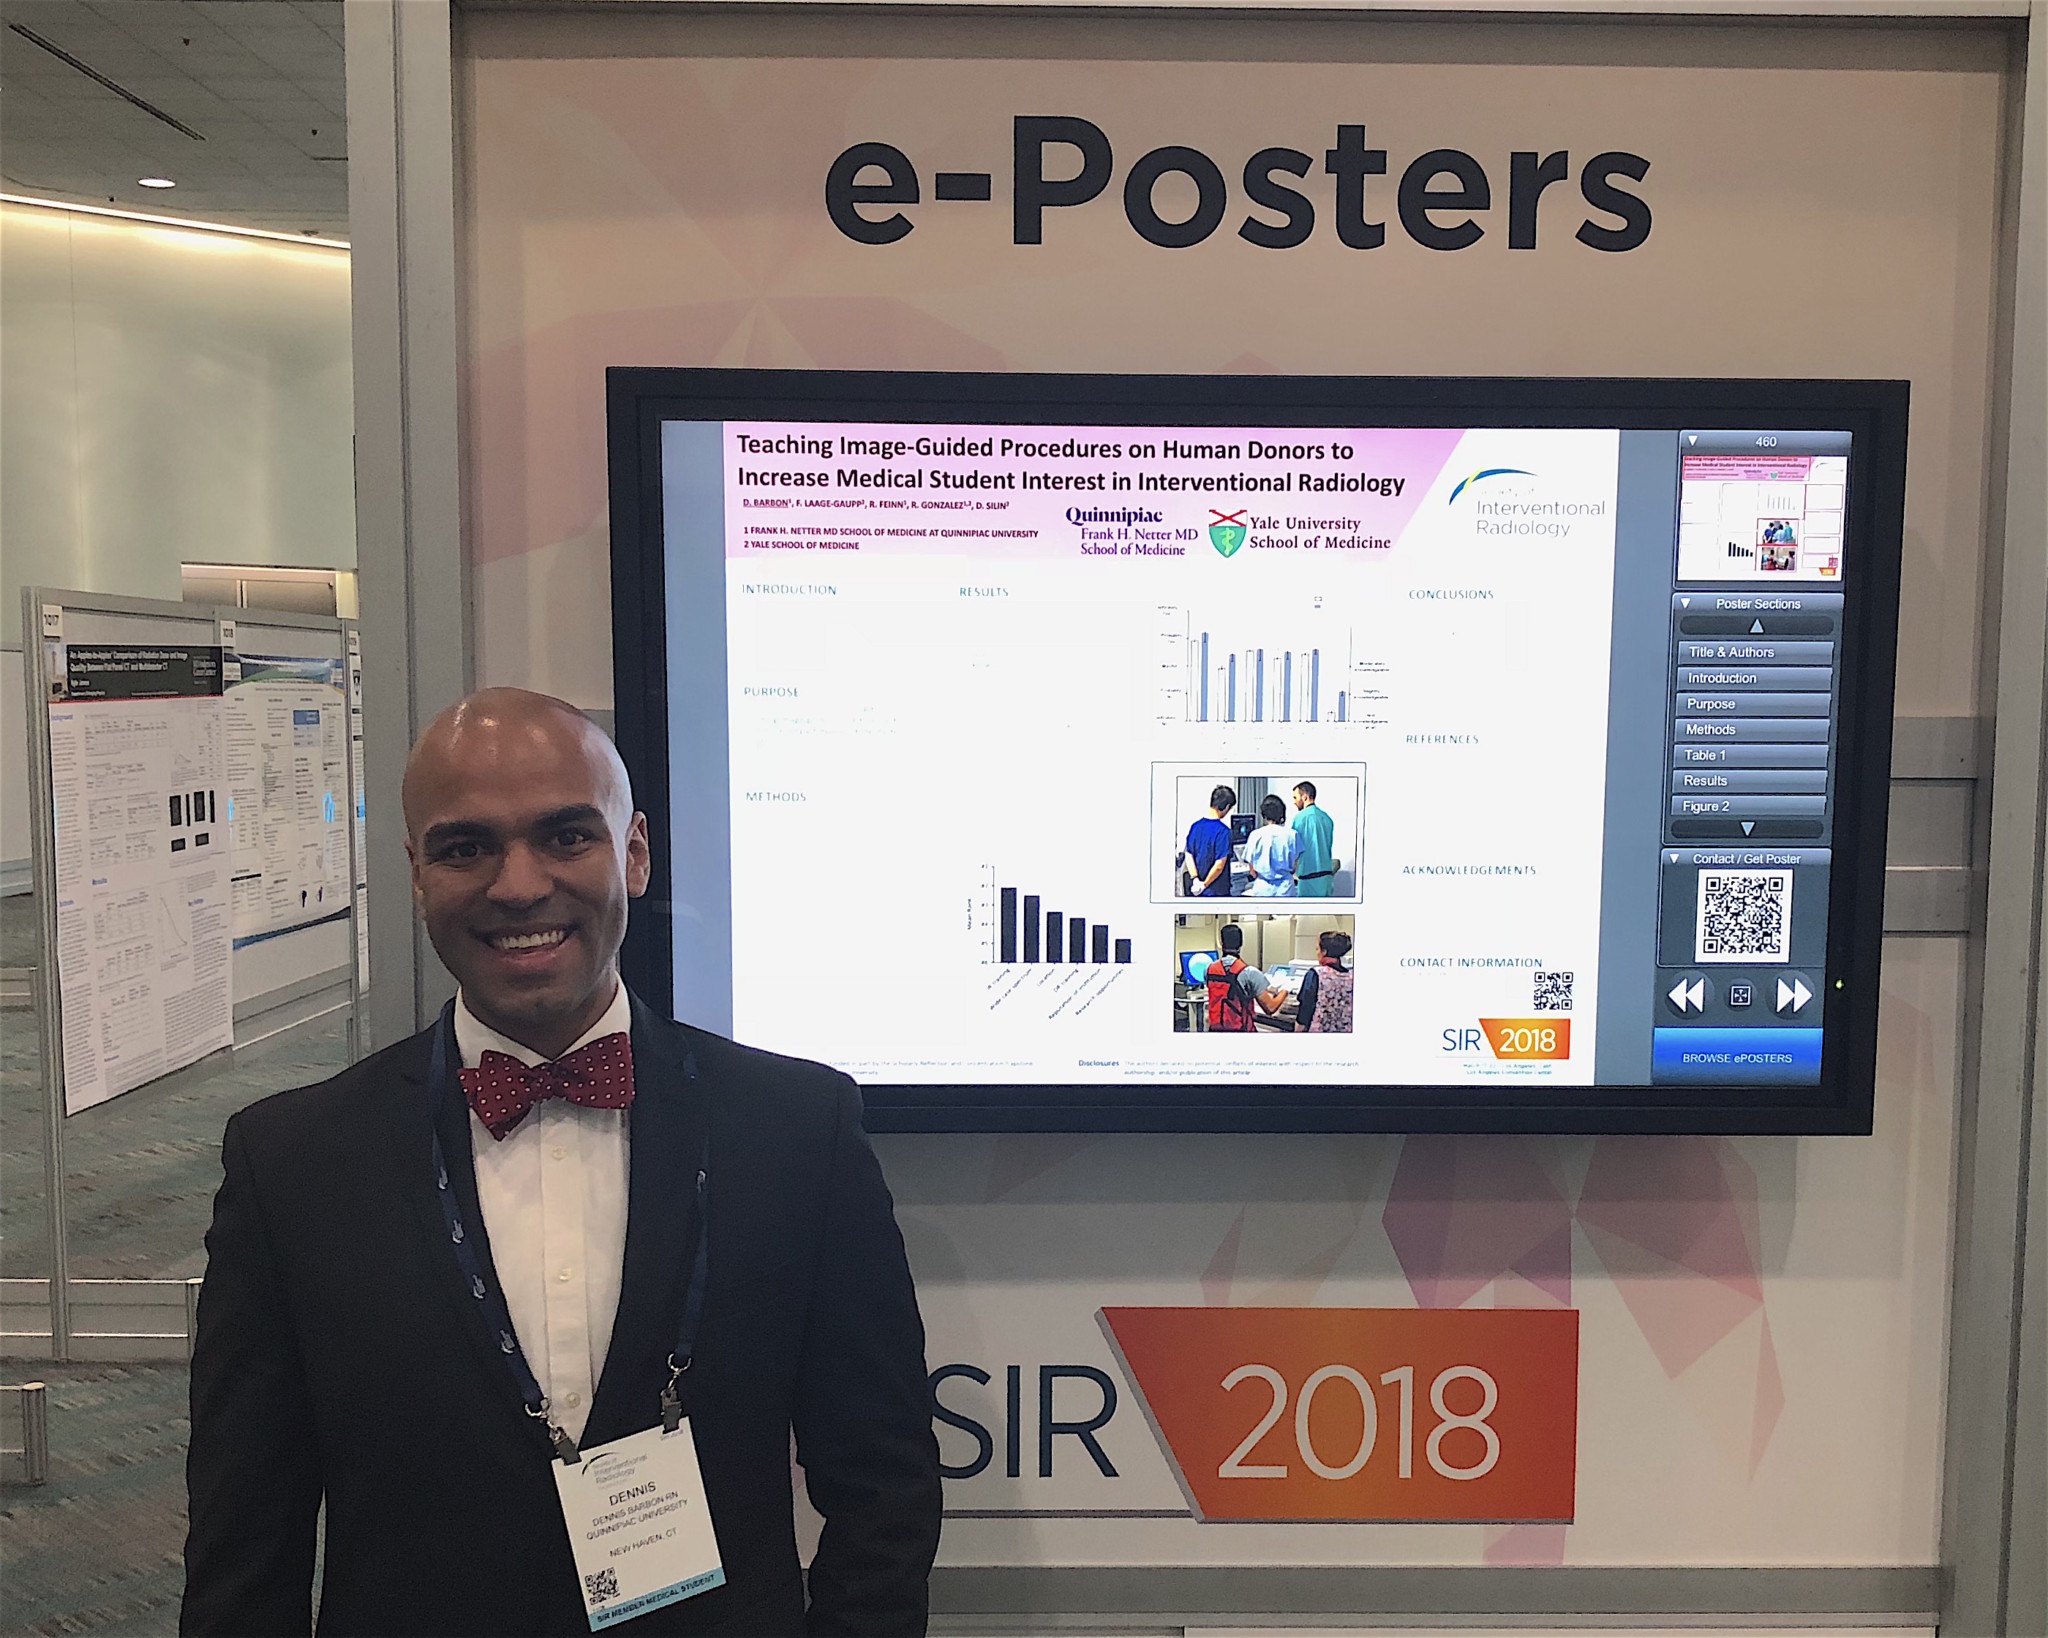 Dennis Barbon presenting at the Society of Interventional Radiology Annual Meeting 2018 in Los Angeles, CA